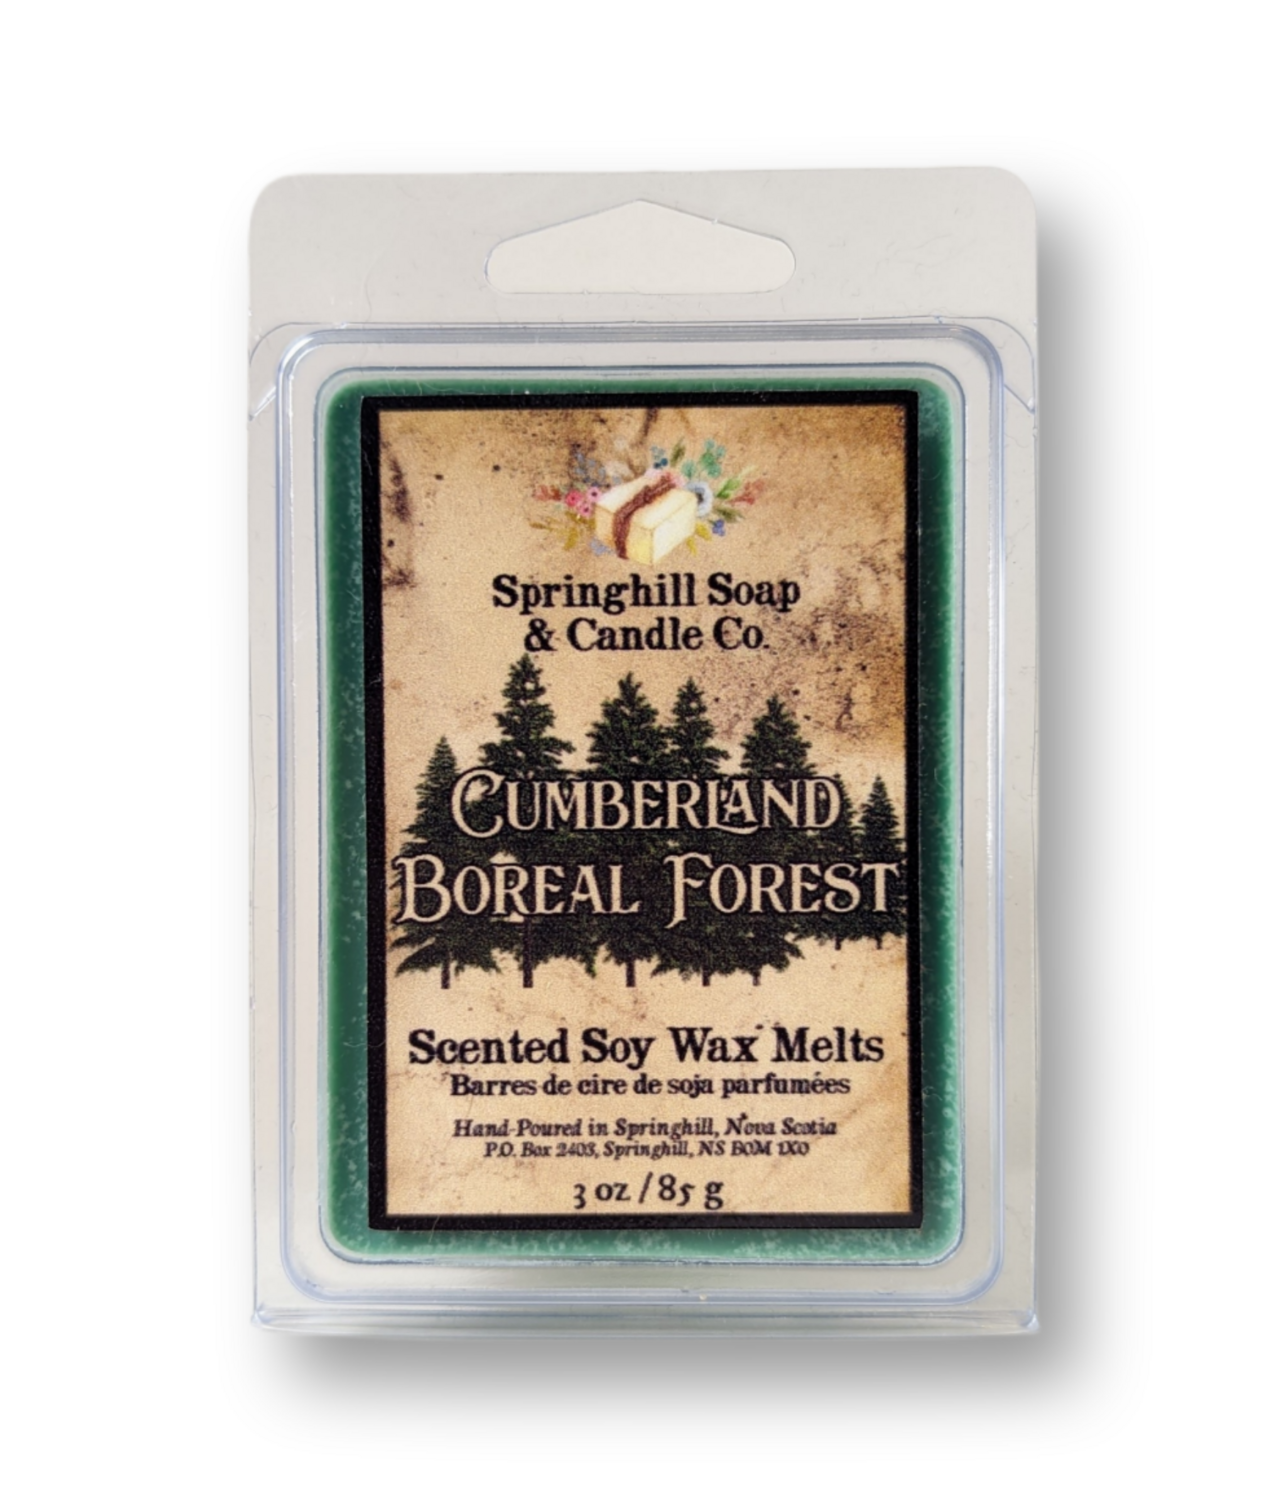 Cumberland Boreal Forest Soy Wax Melts (3oz) (2021)